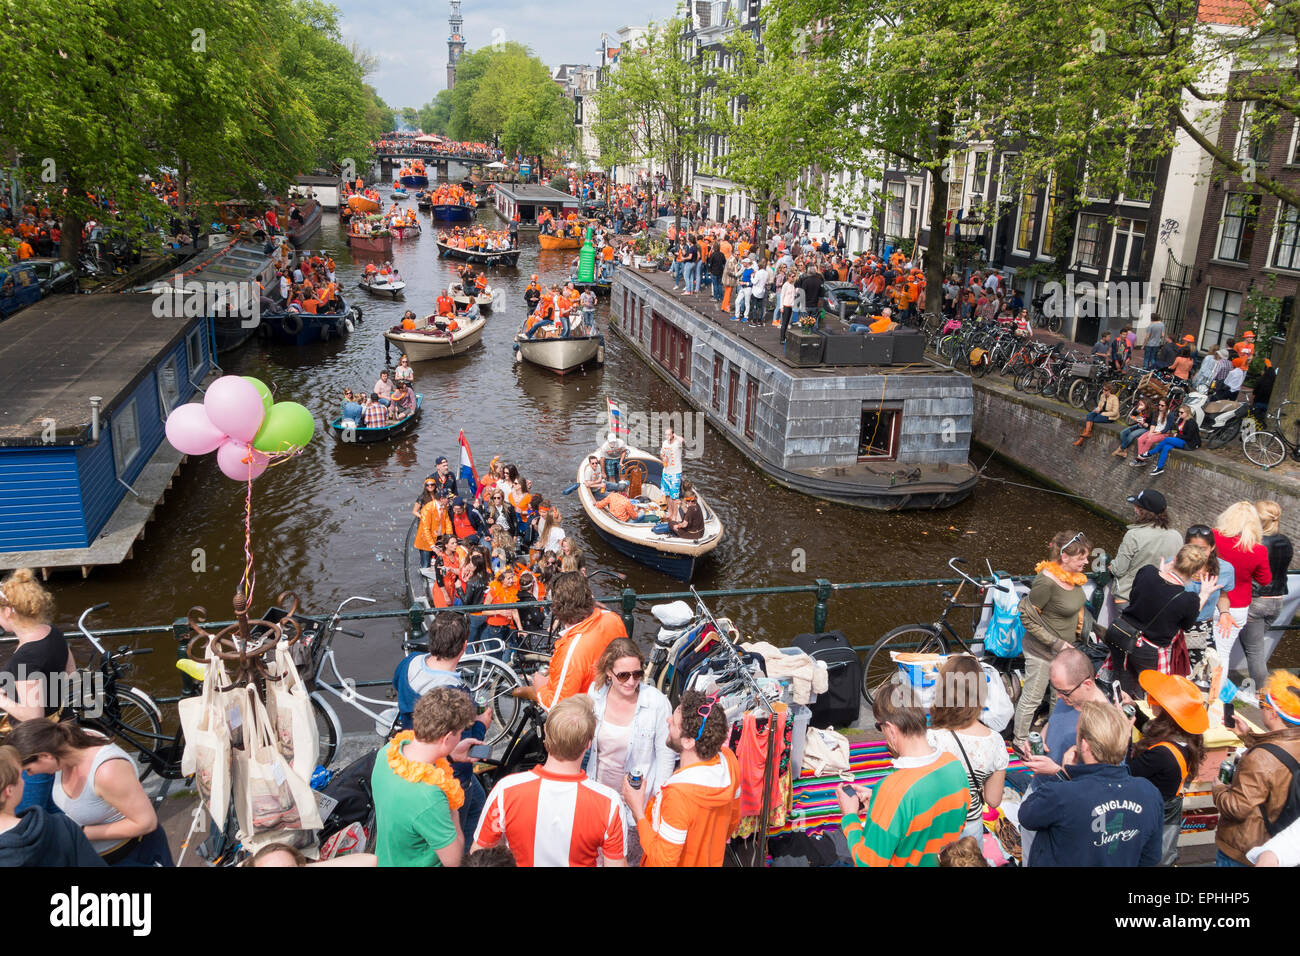 Crowds celebrating Koningsdag, Kings Day Festival in Amsterdam w boats on Prinsengracht Canal and Vrijmarkt on the bridge. Stock Photo